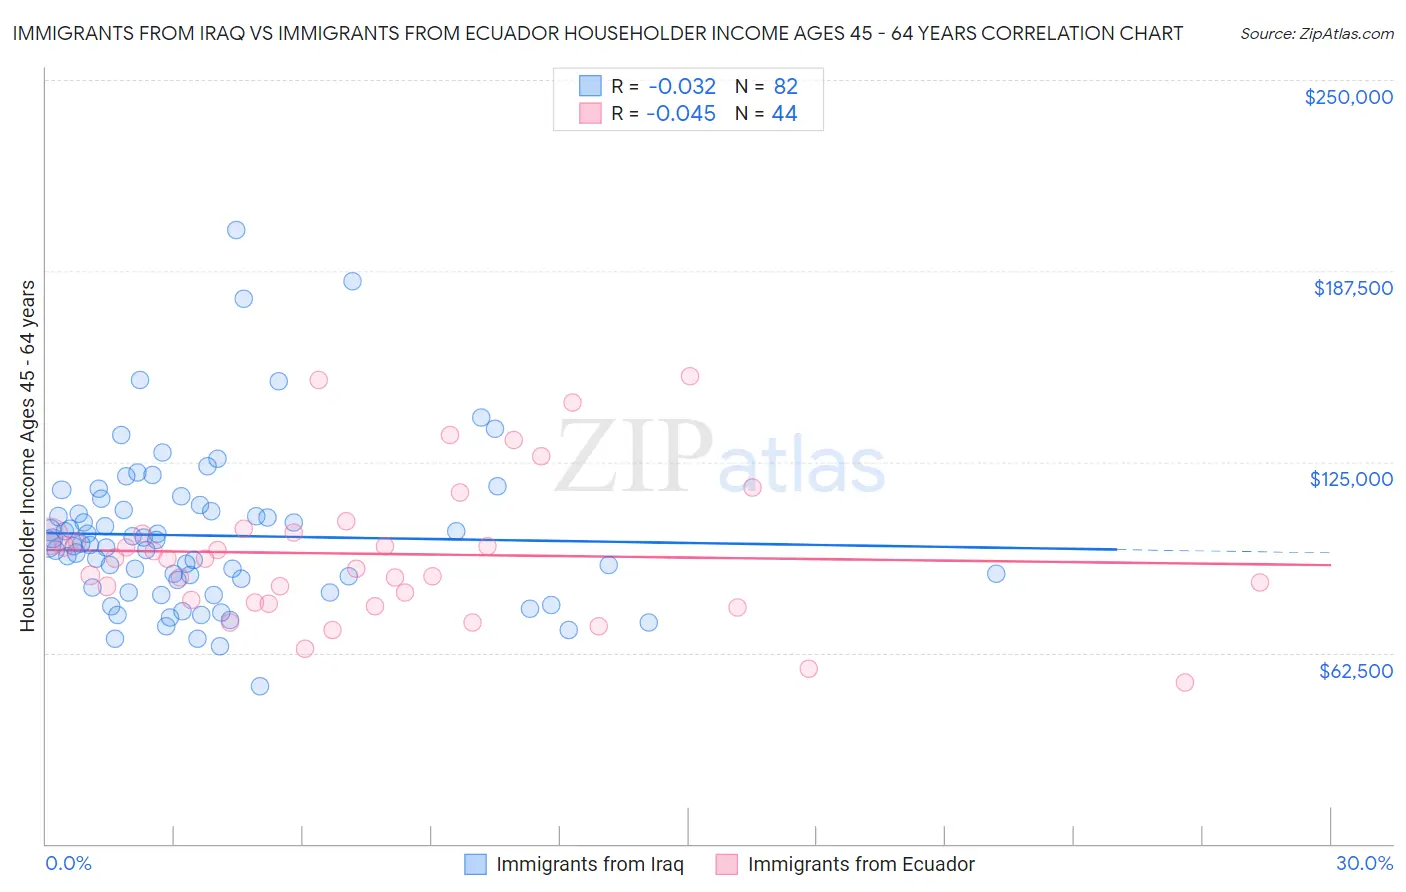 Immigrants from Iraq vs Immigrants from Ecuador Householder Income Ages 45 - 64 years